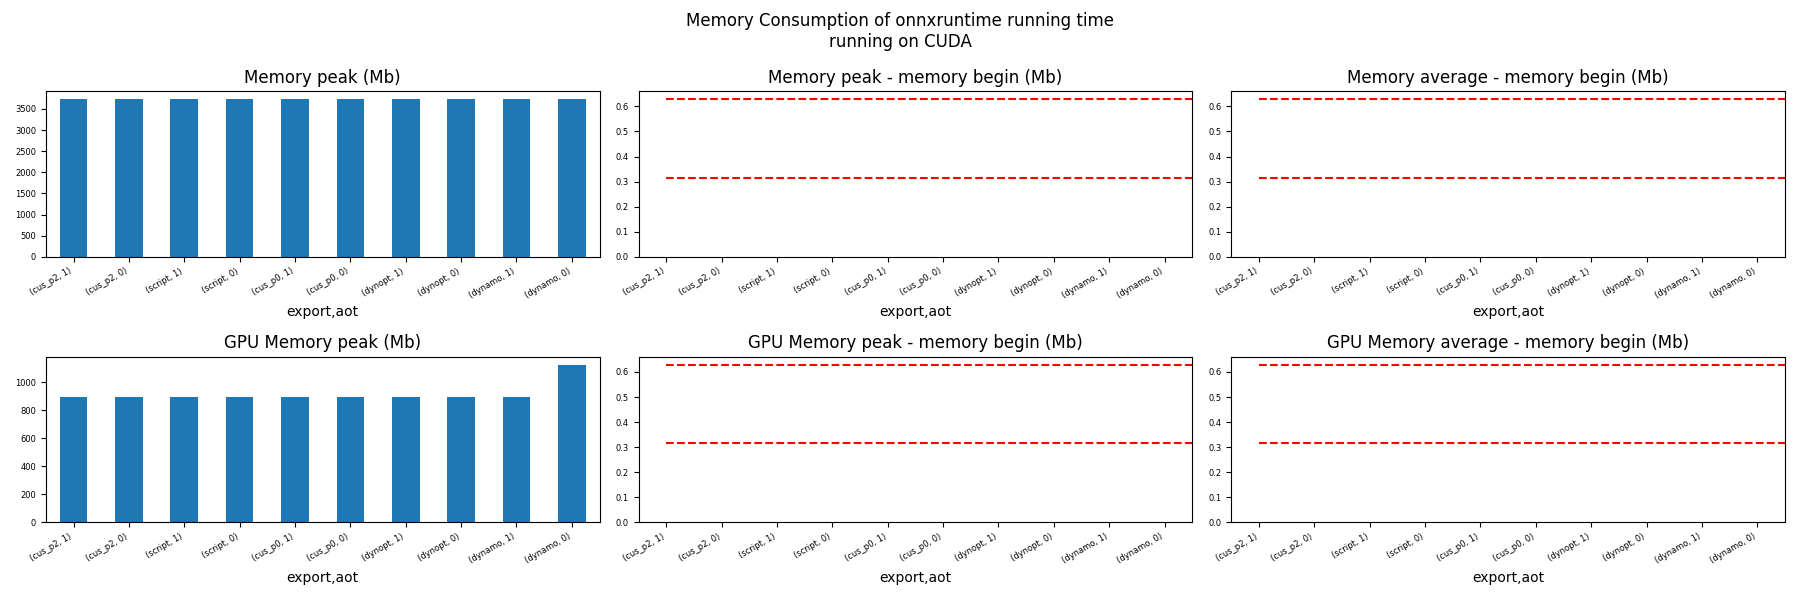 Memory Consumption of onnxruntime running time running on CUDA, Memory peak (Mb), Memory peak - memory begin (Mb), Memory average - memory begin (Mb), GPU Memory peak (Mb), GPU Memory peak - memory begin (Mb), GPU Memory average - memory begin (Mb)